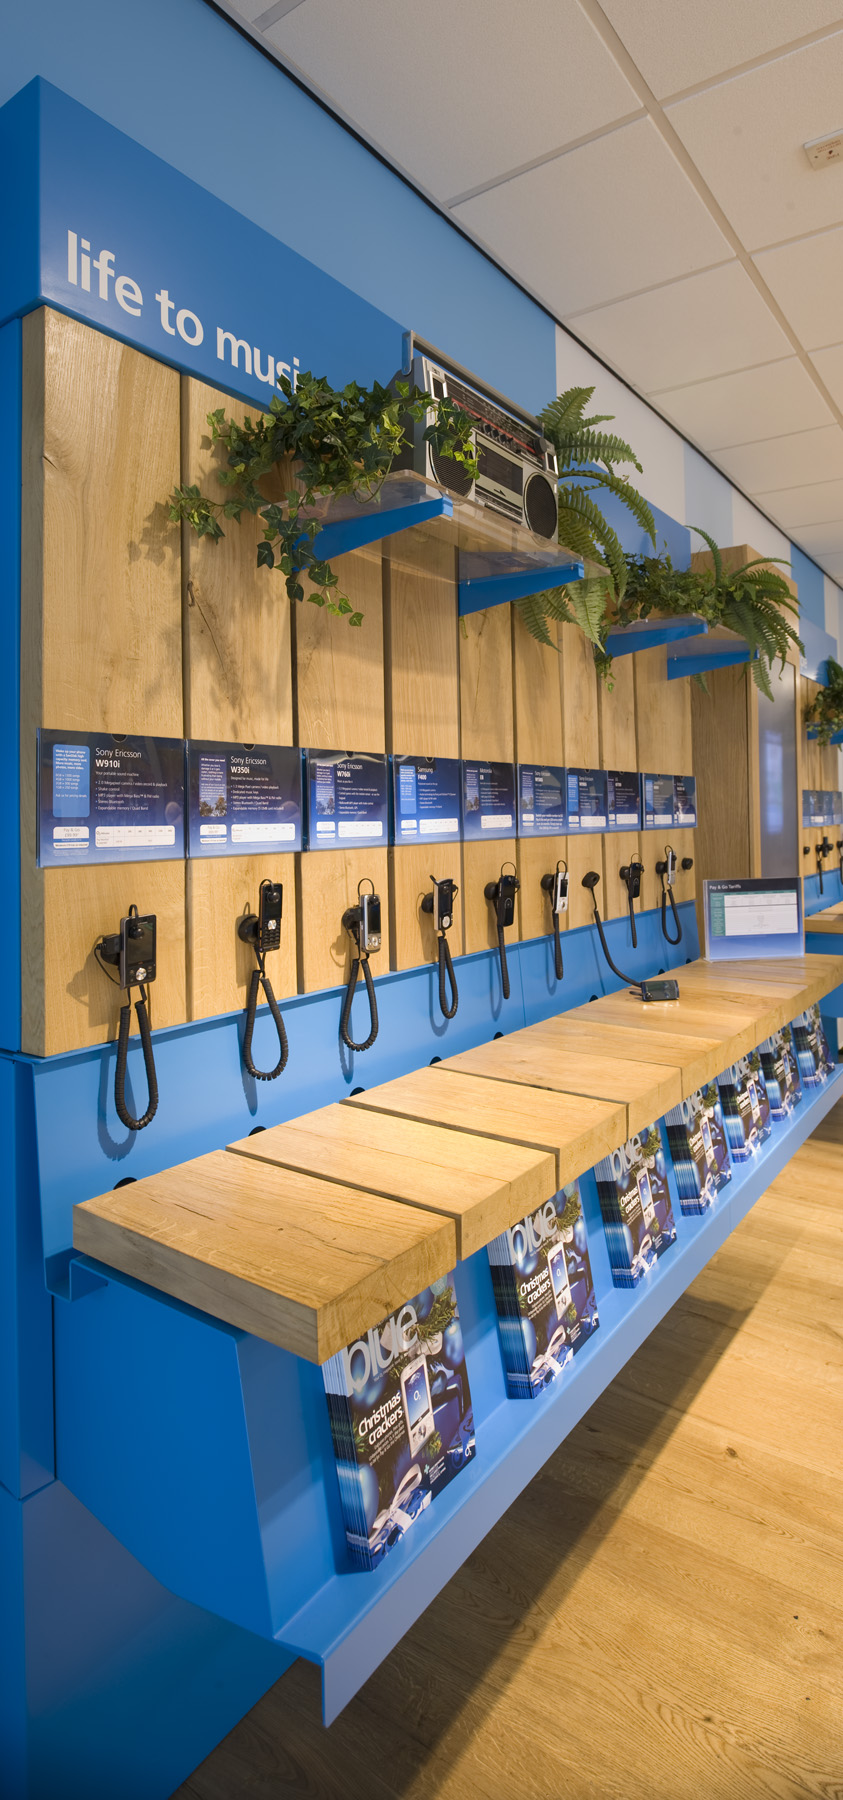 Display fixtures present working handsets in themed groupings.